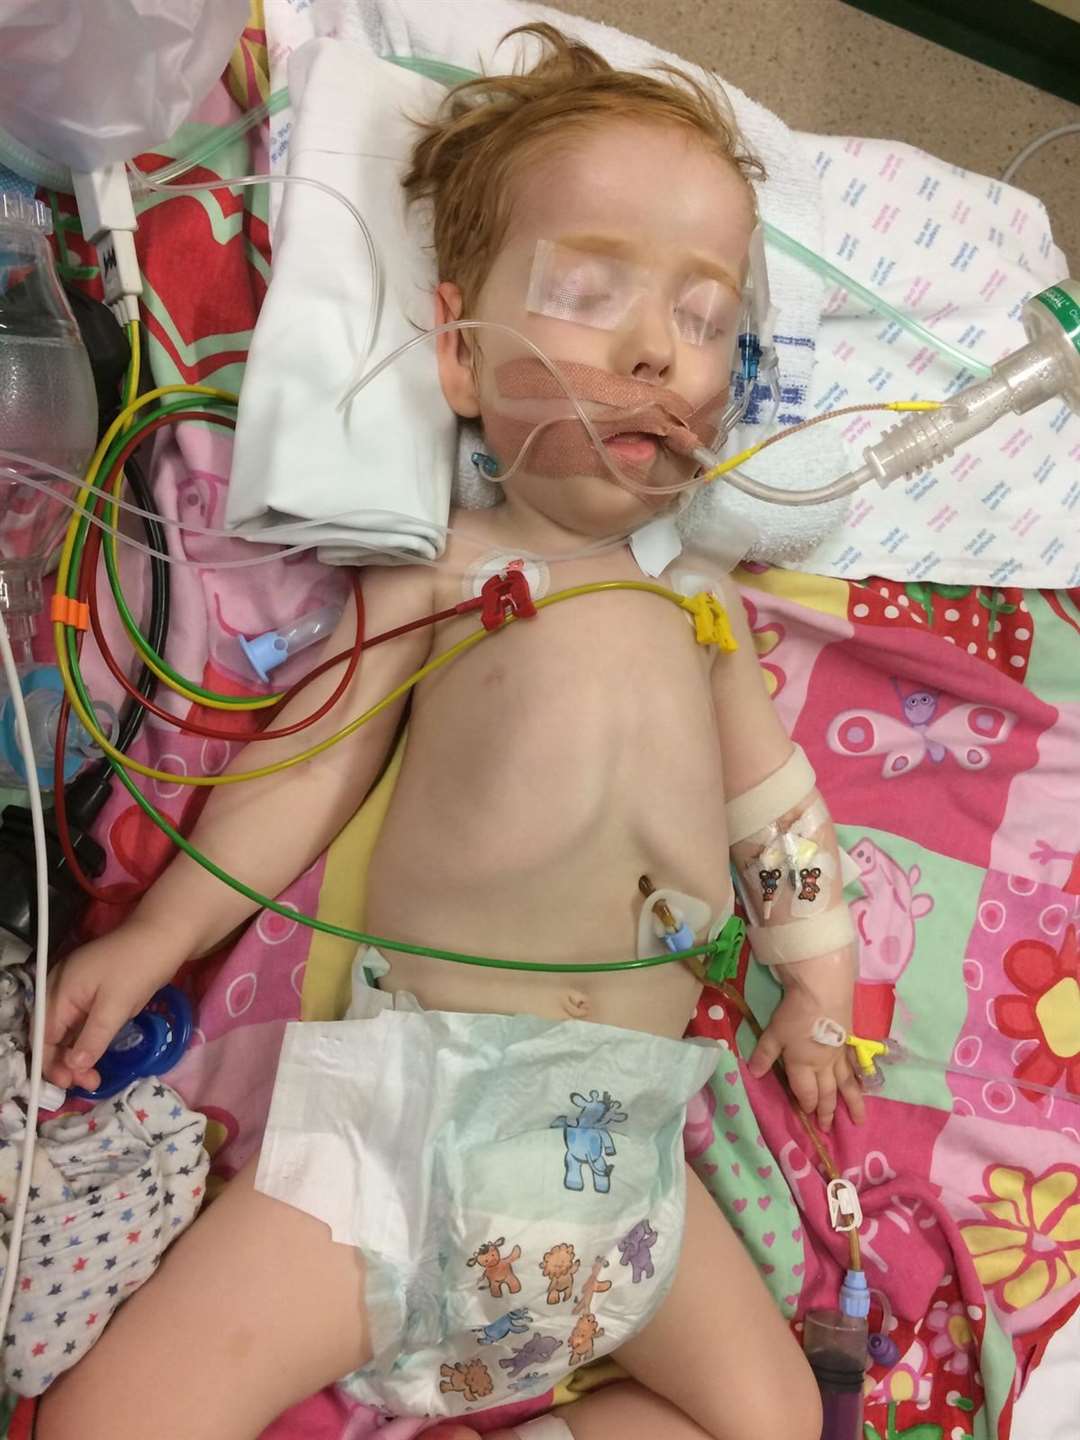 Ezra has almost died 10 times due to complications from SMA type 1